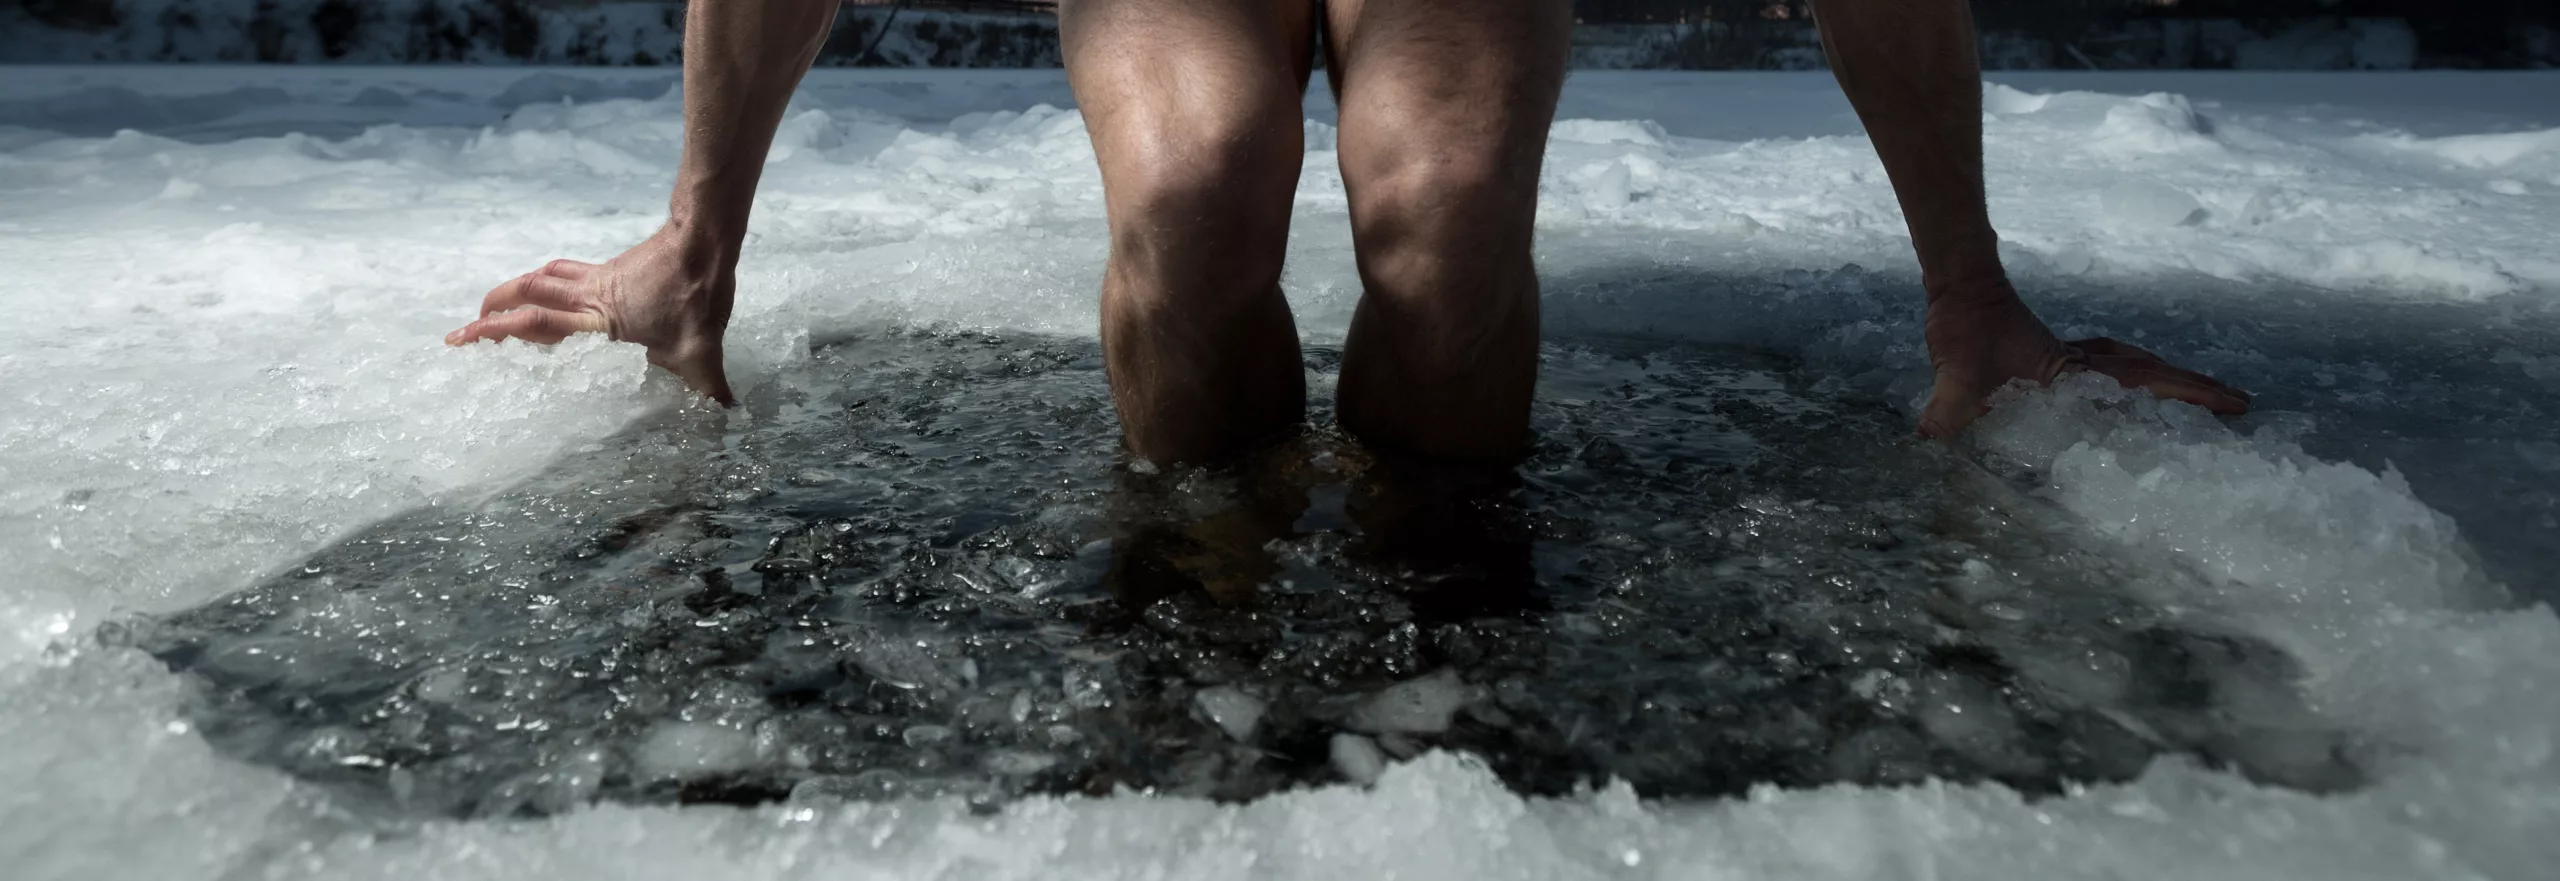 Cold Plunges: Benefits, Risks, And the Science of Cold Water Immersion